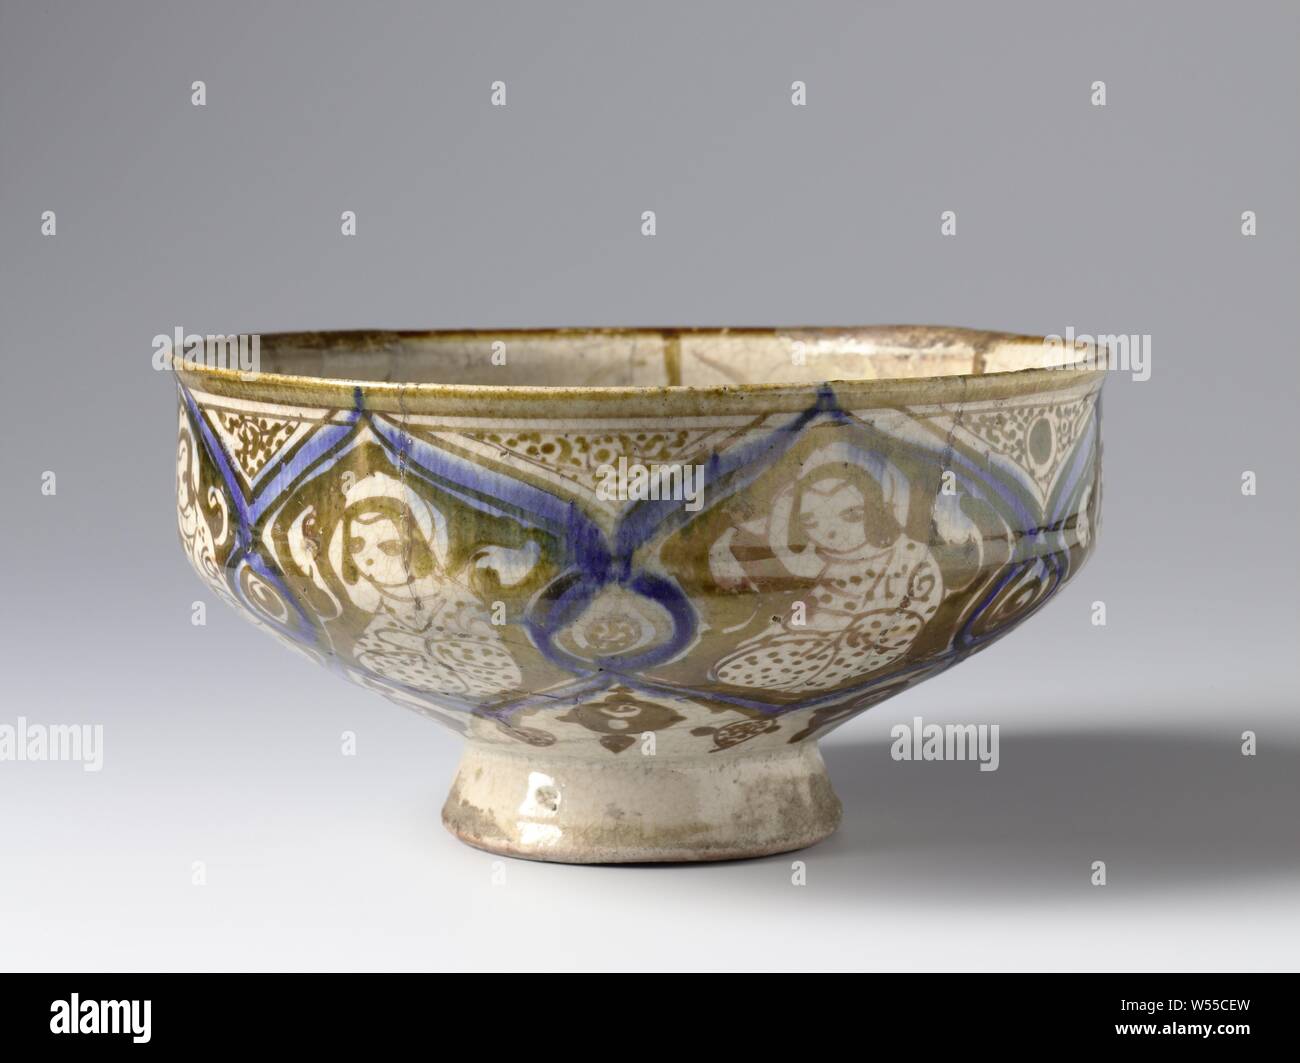 Bowl with a seated lady in a panel decoration, Bowl of quartz-frit ware  decorated with polychrome luster on an opaque white tin-lead alkaline  glaze. The outer wall is bored in scalloped compartments,